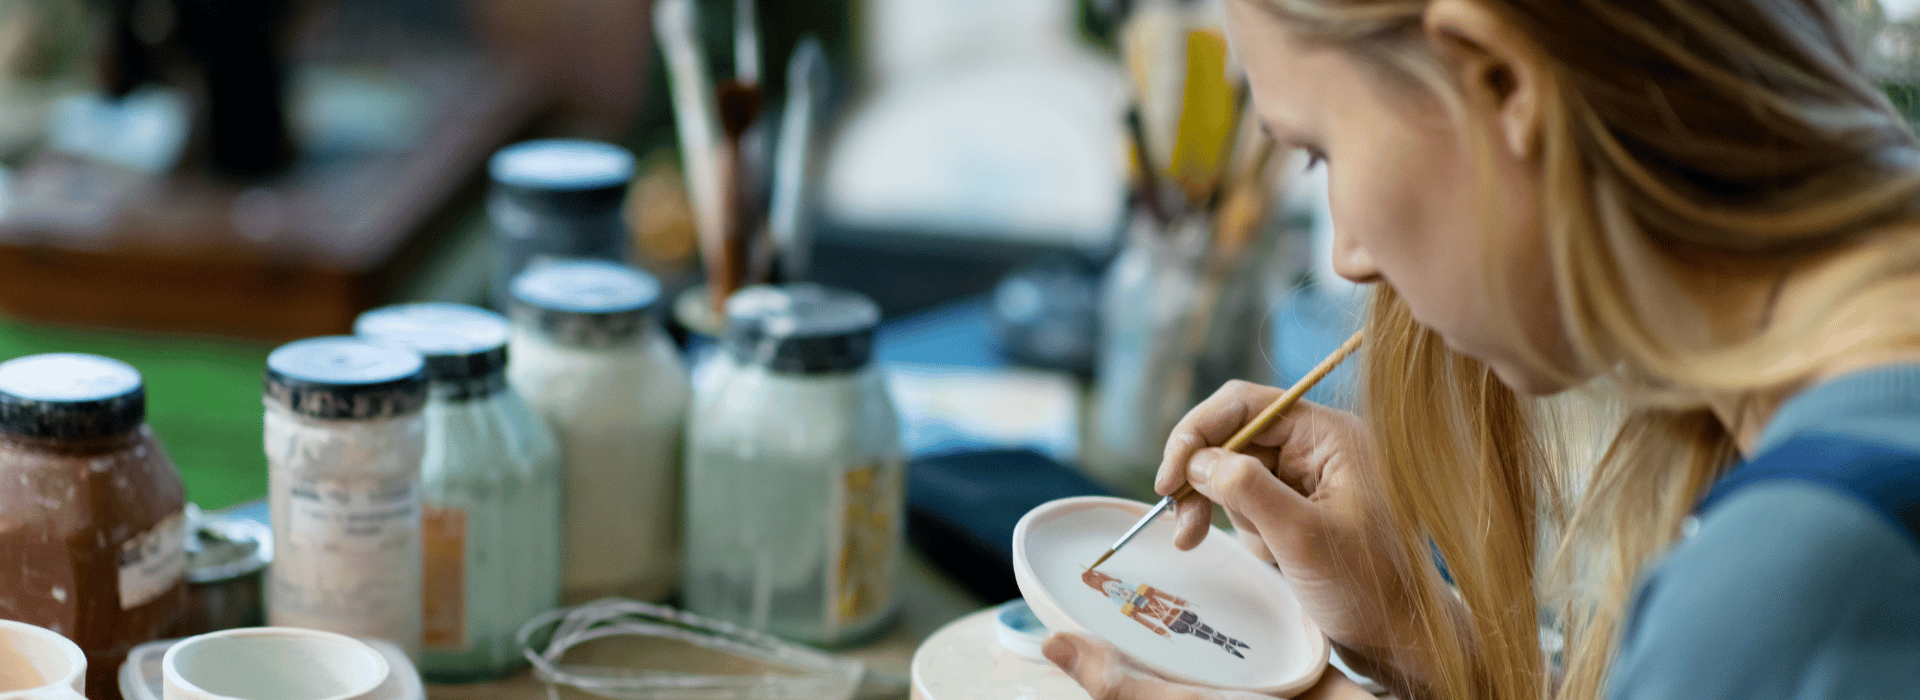 Woman concentrating on painting a piece of pottery | Am I Creative | Shine Body & Bath Chakra Soap | Blog